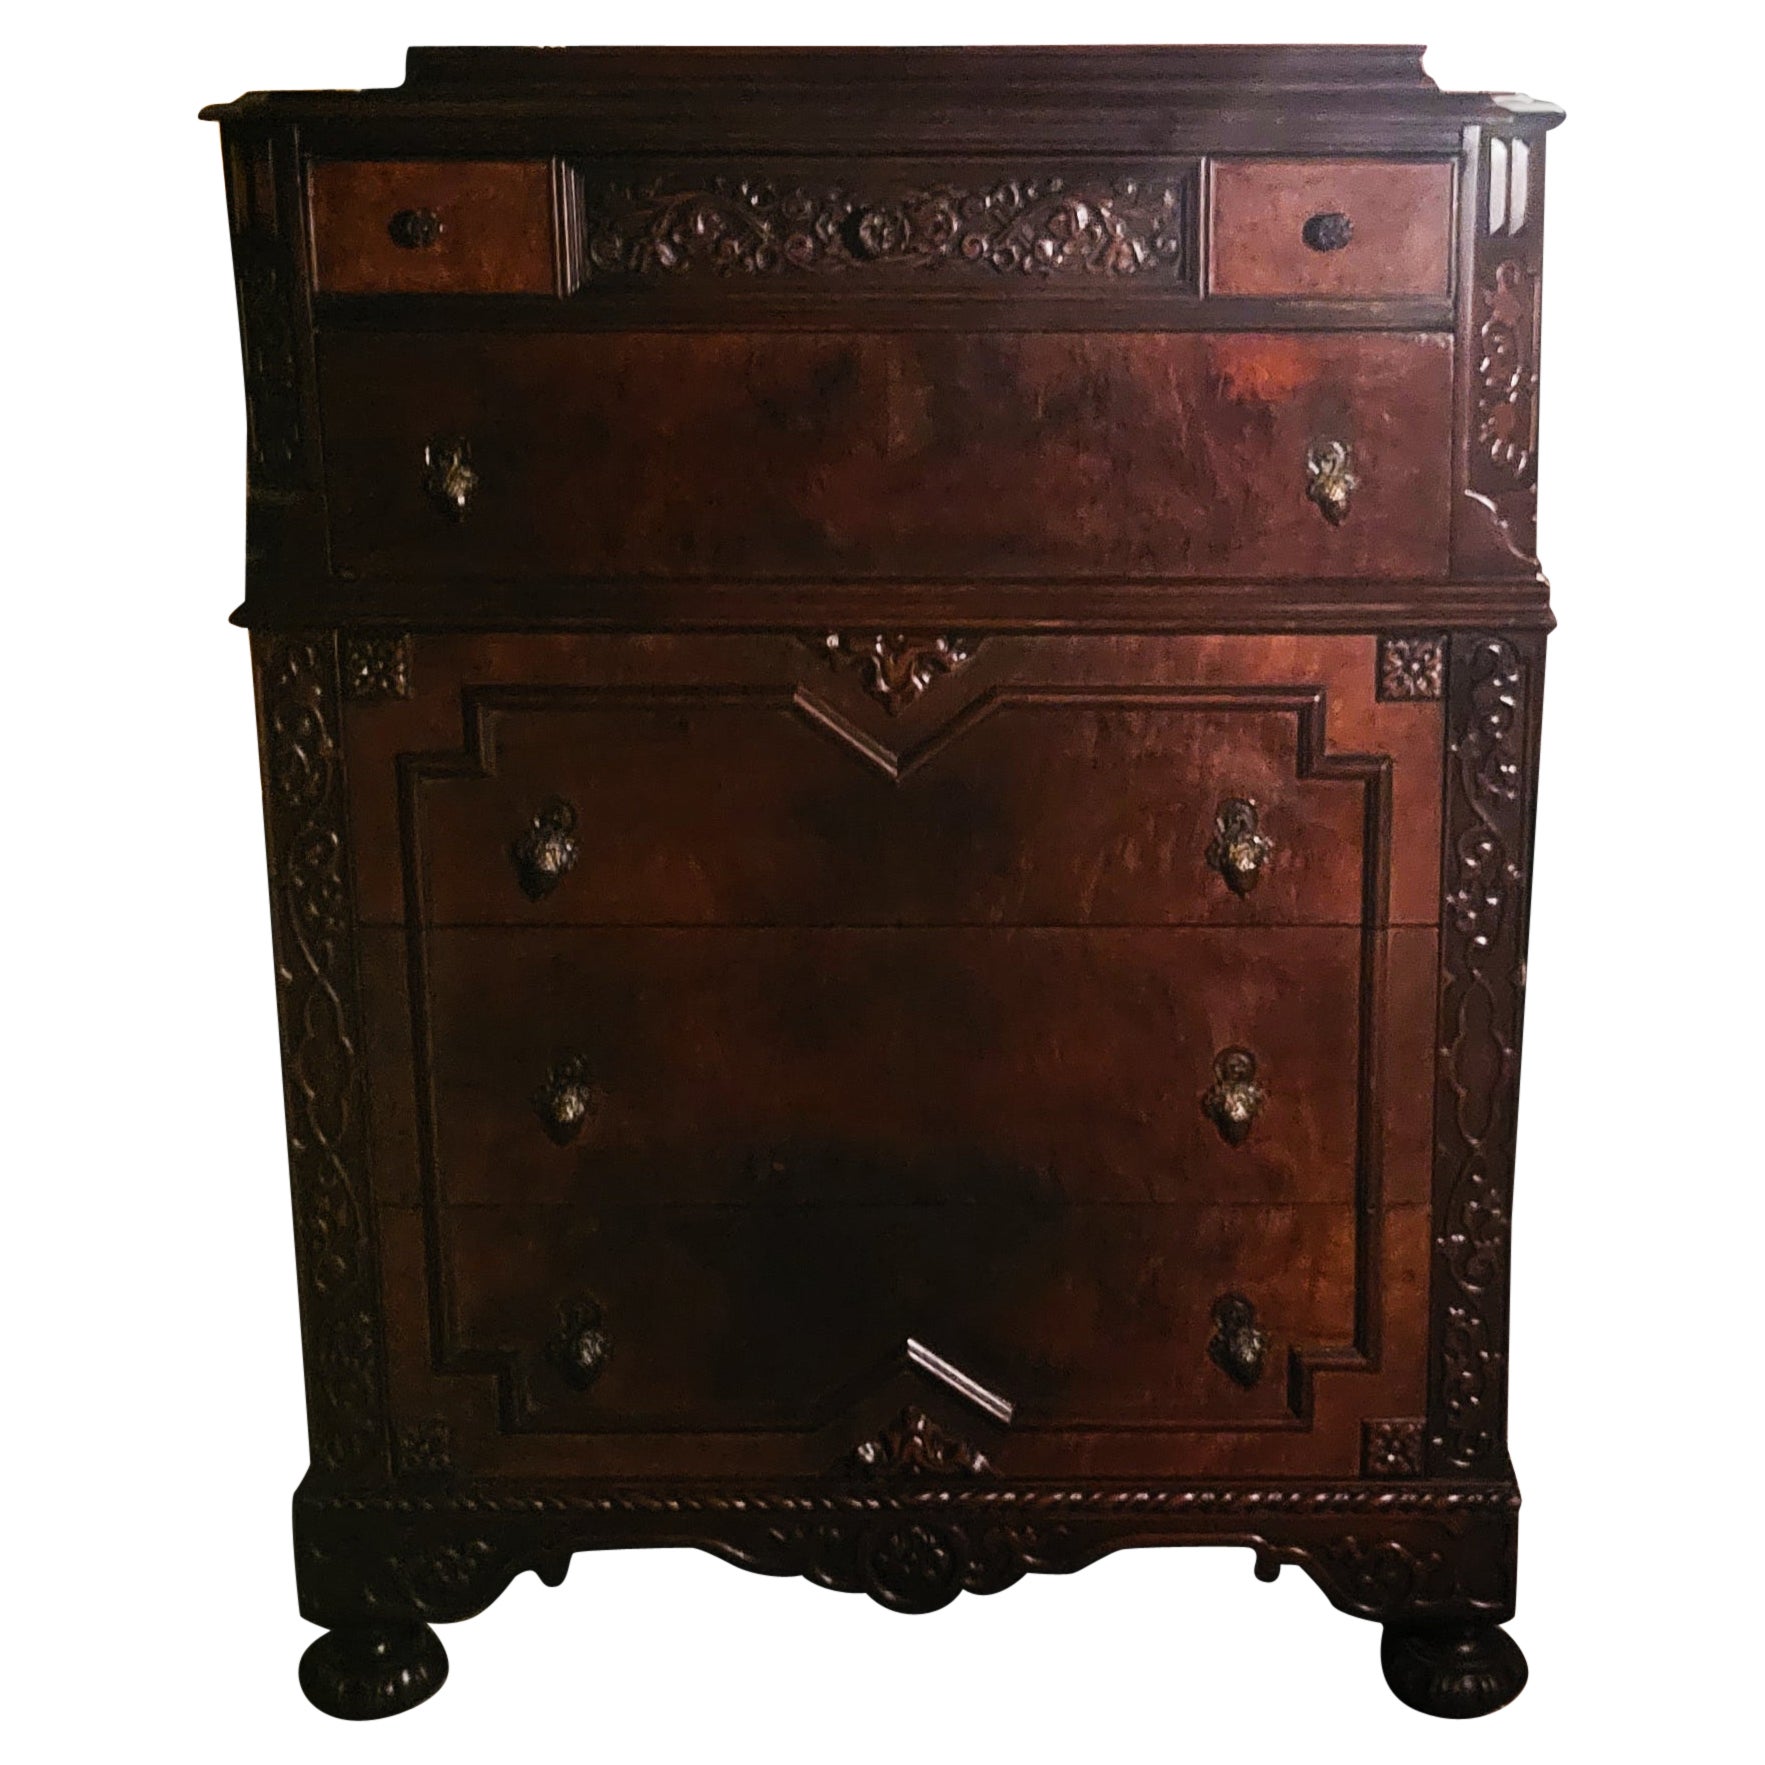 Antique Carved Walnut - Mahogany Dresser with 5 Drawers